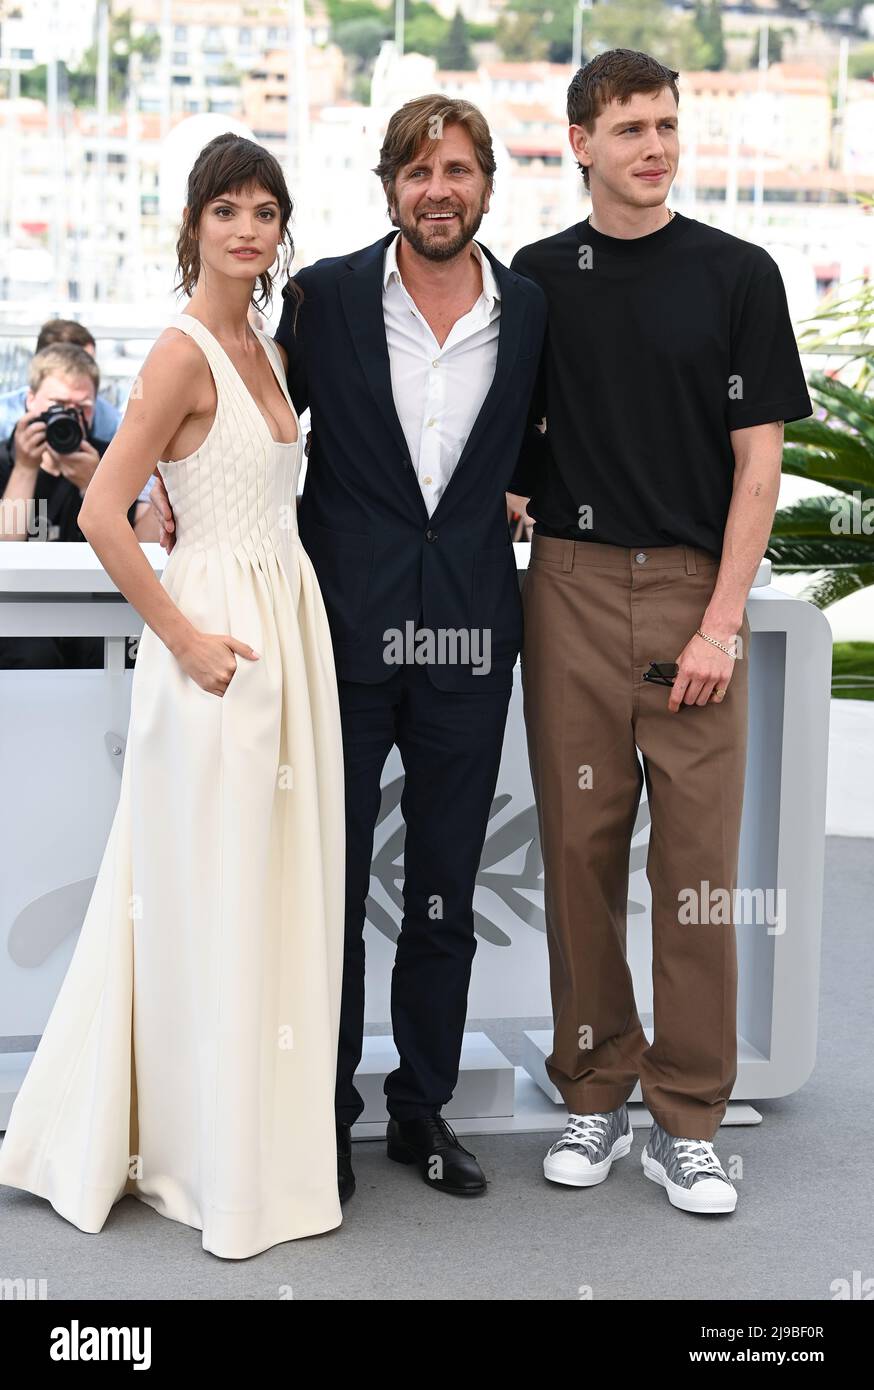 May 22nd, 2022. Cannes, France. Ruben Ostlund, Charlbi Dean and Harris Dickinson attending the Triangle of Sadness photocall, part of the 75th Cannes Film Festival, Palais de Festival, Cannes. Credit: Doug Peters/EMPICS/Alamy Live News Stock Photo